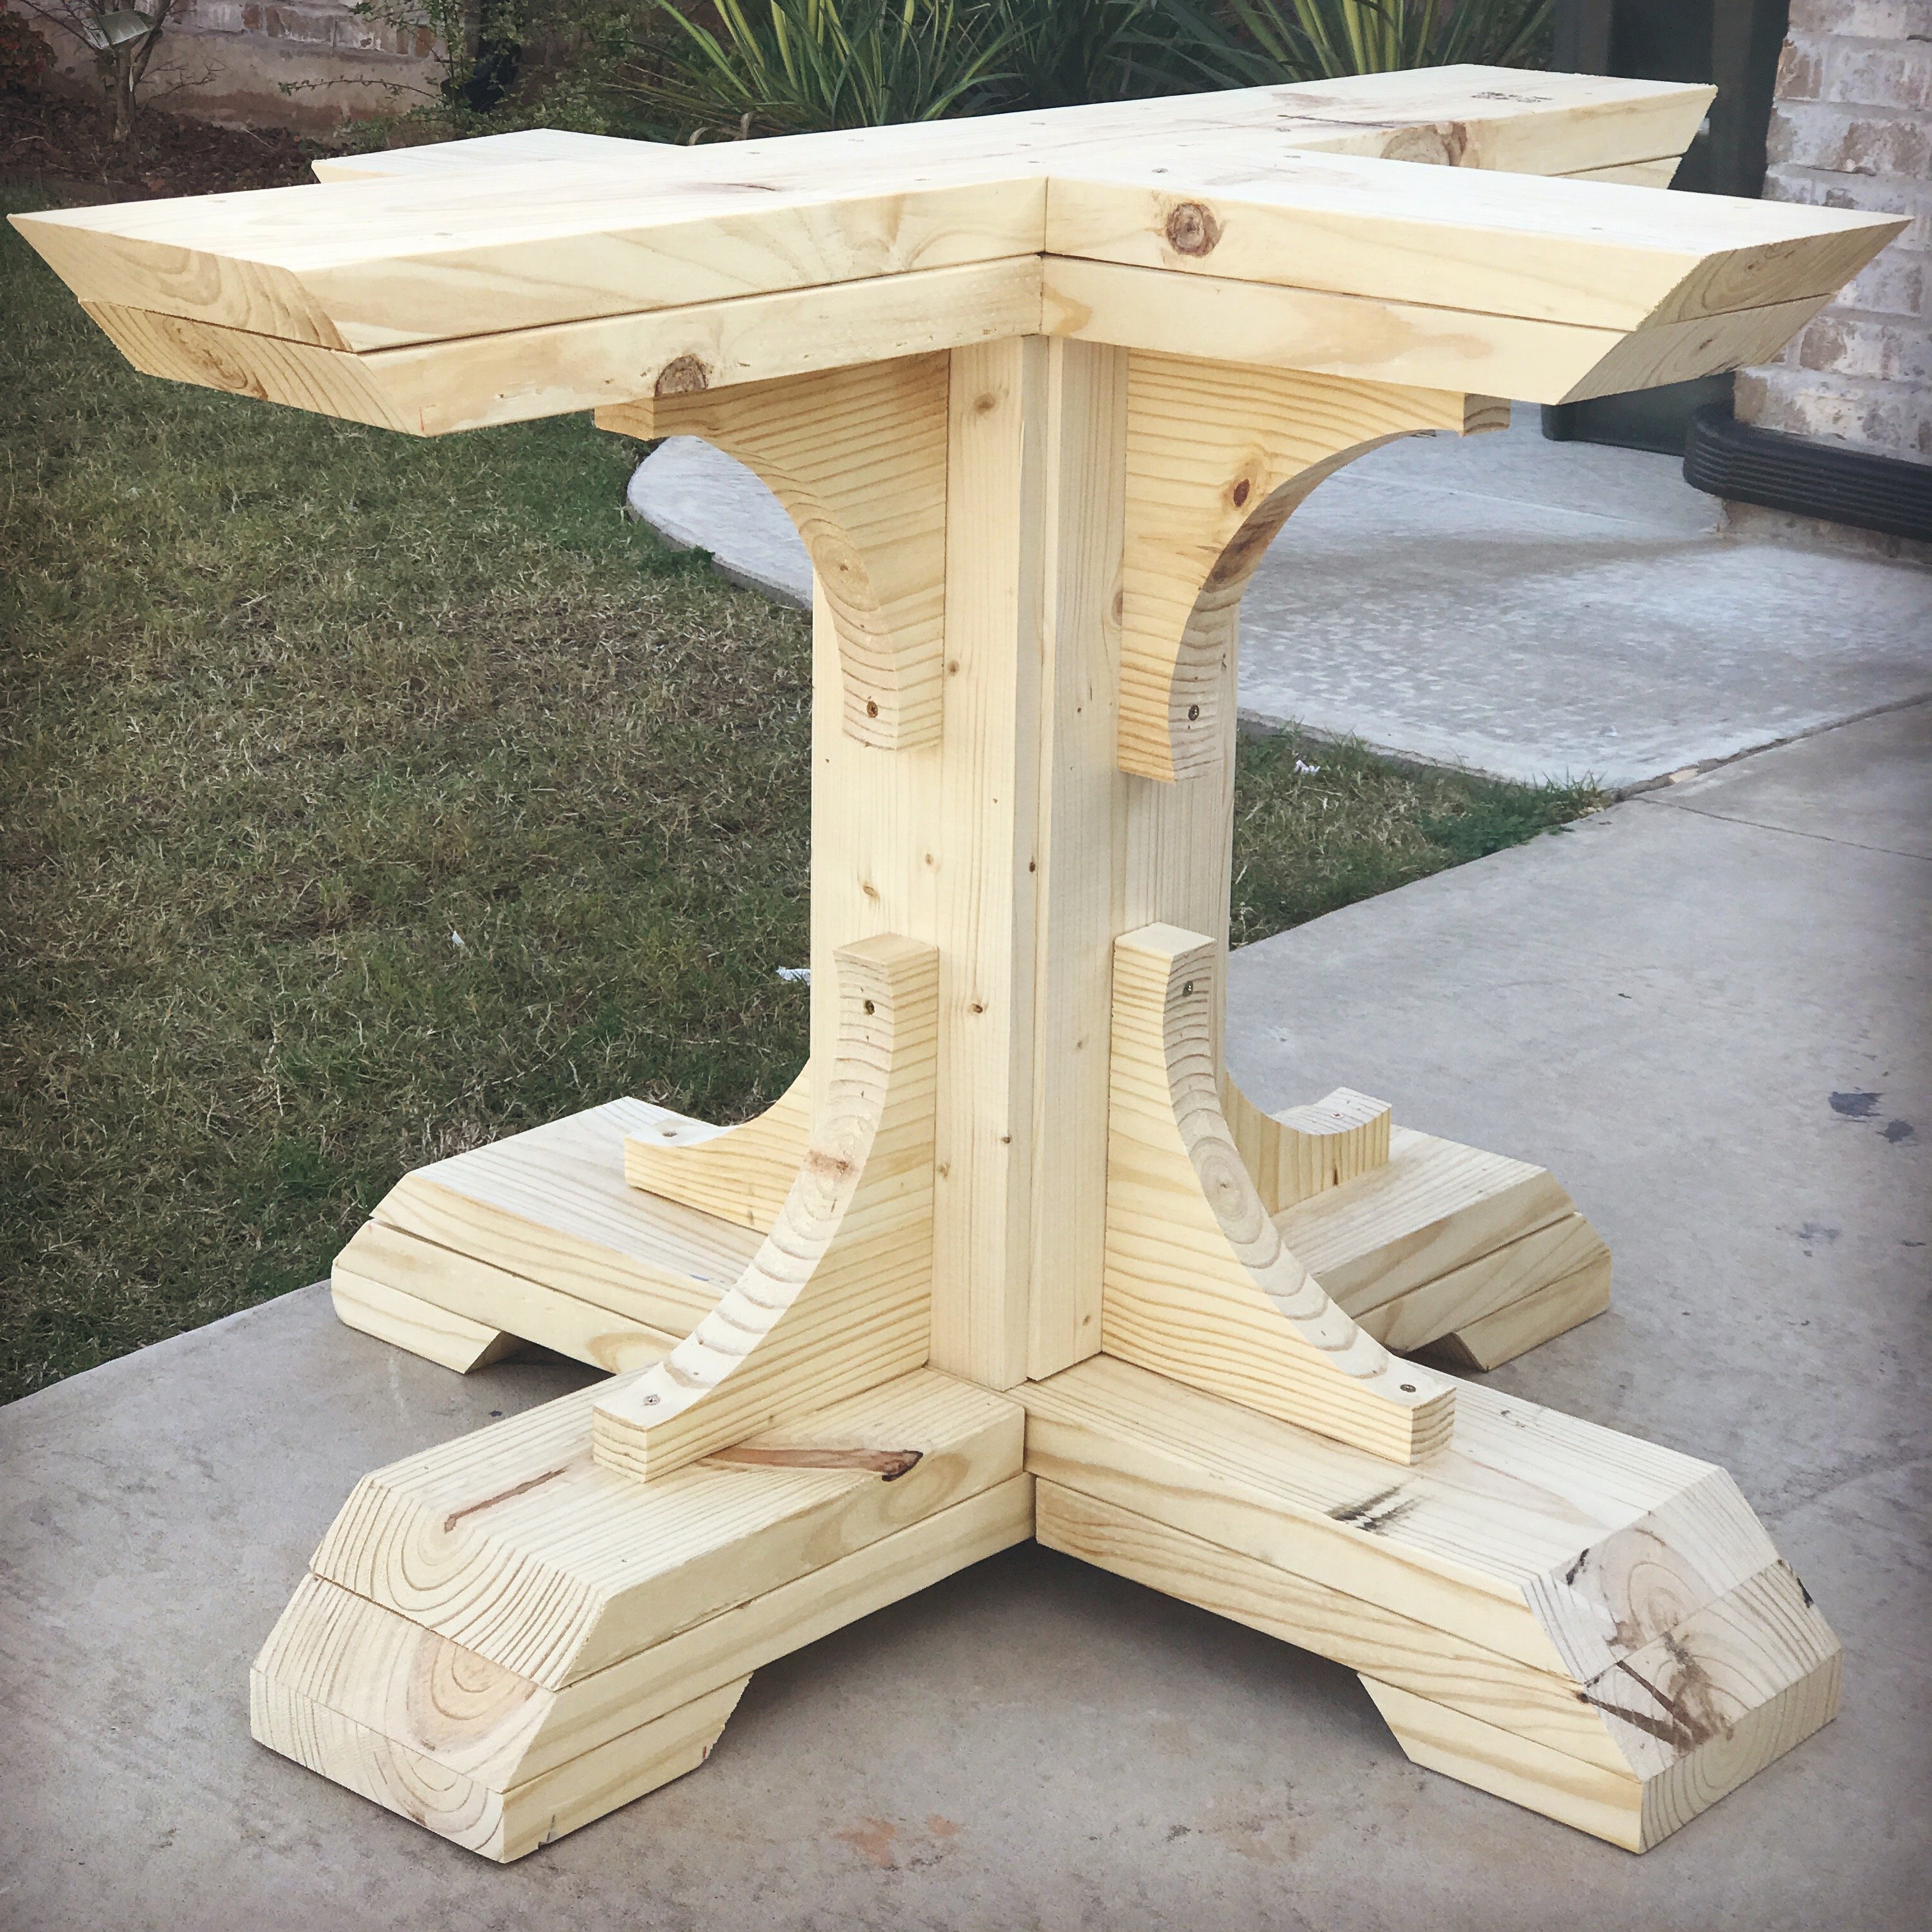 Ana White 54" Round Pedestal Table DIY Projects